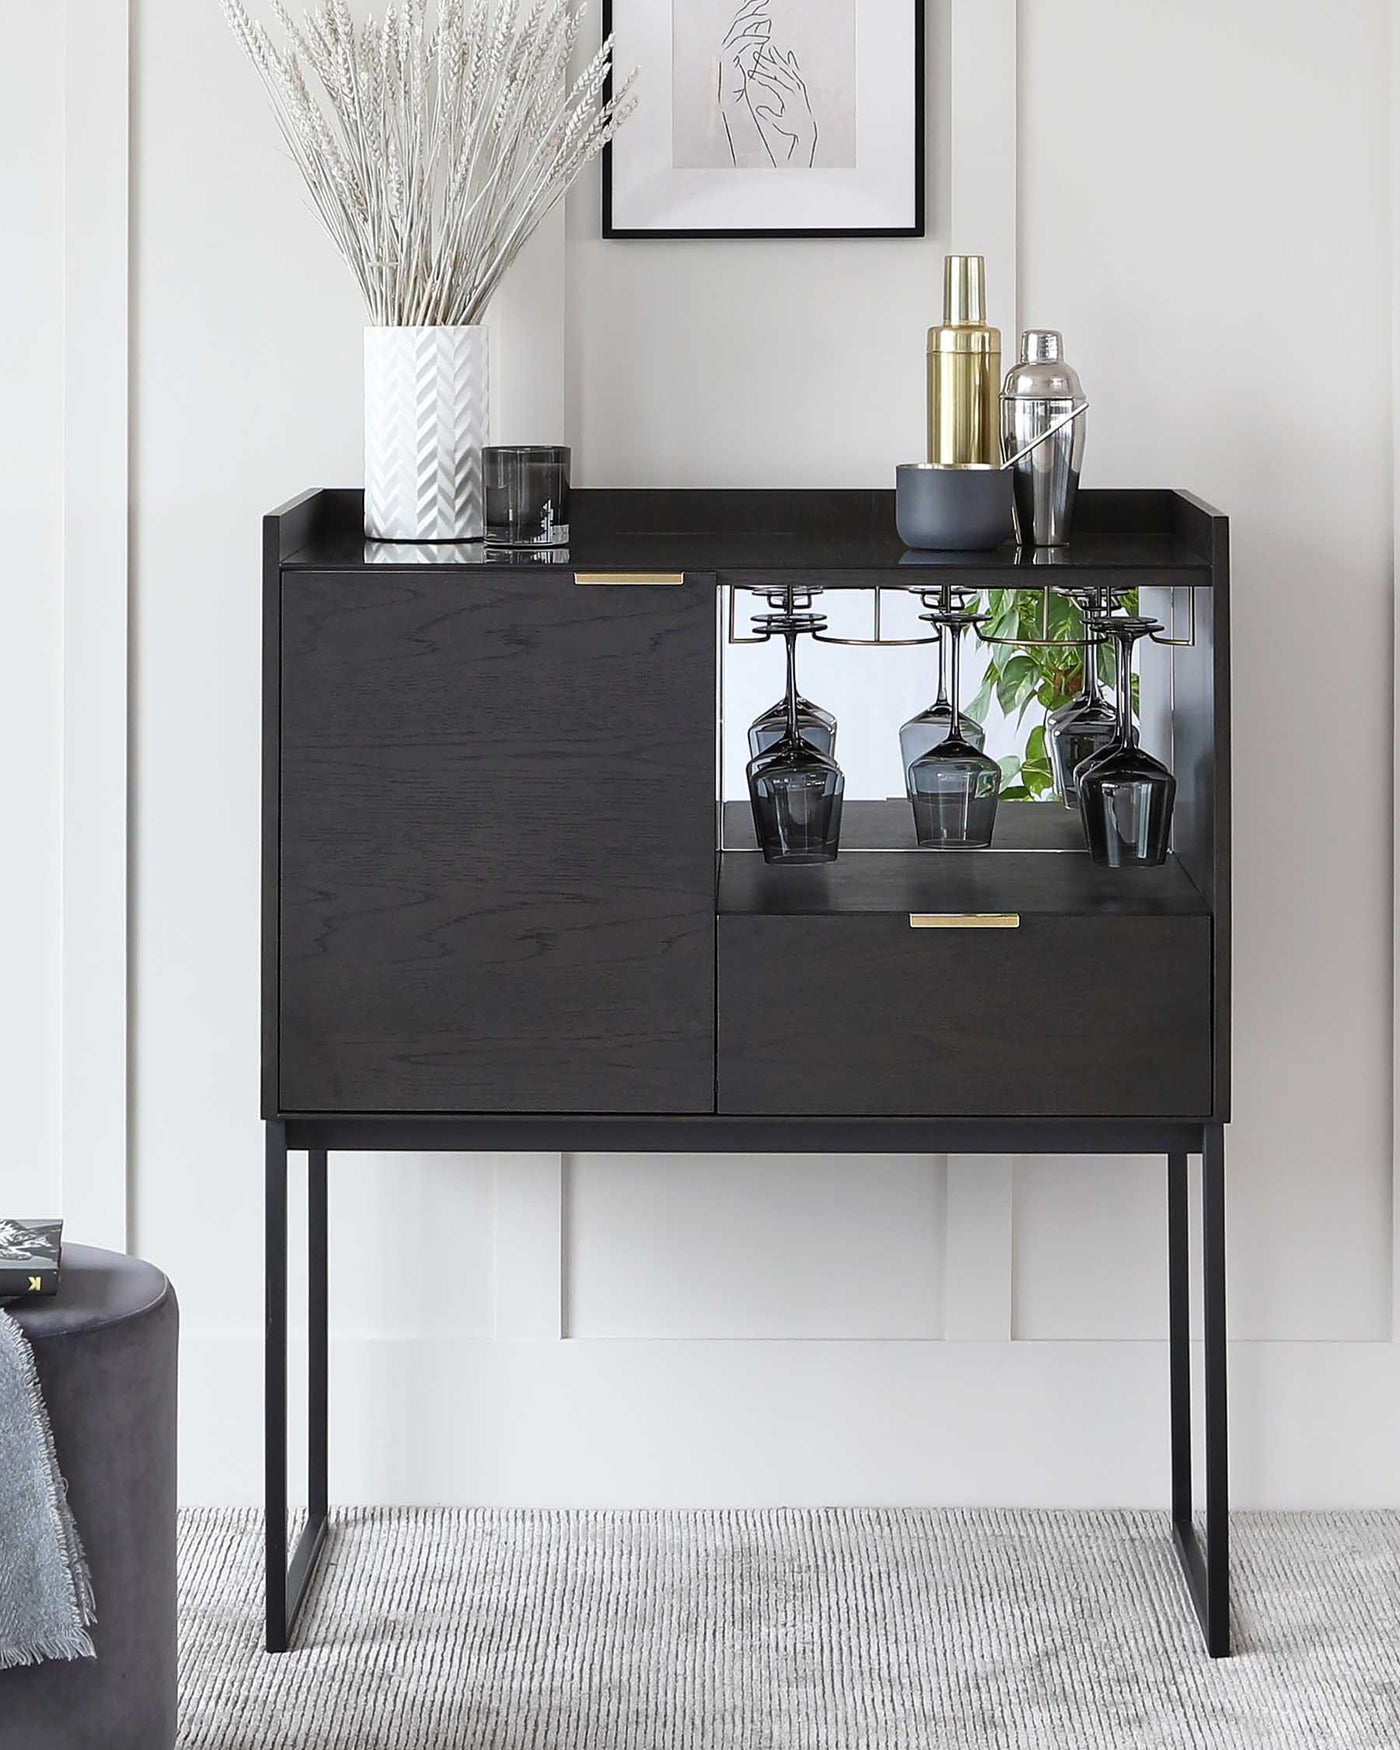 Modern black wooden sideboard with sleek metal handles and thin metal legs featuring two drawers and a lower shelf with glass holders, elegantly staged with decorative vases, cocktail shakers, and a framed artwork in the background.